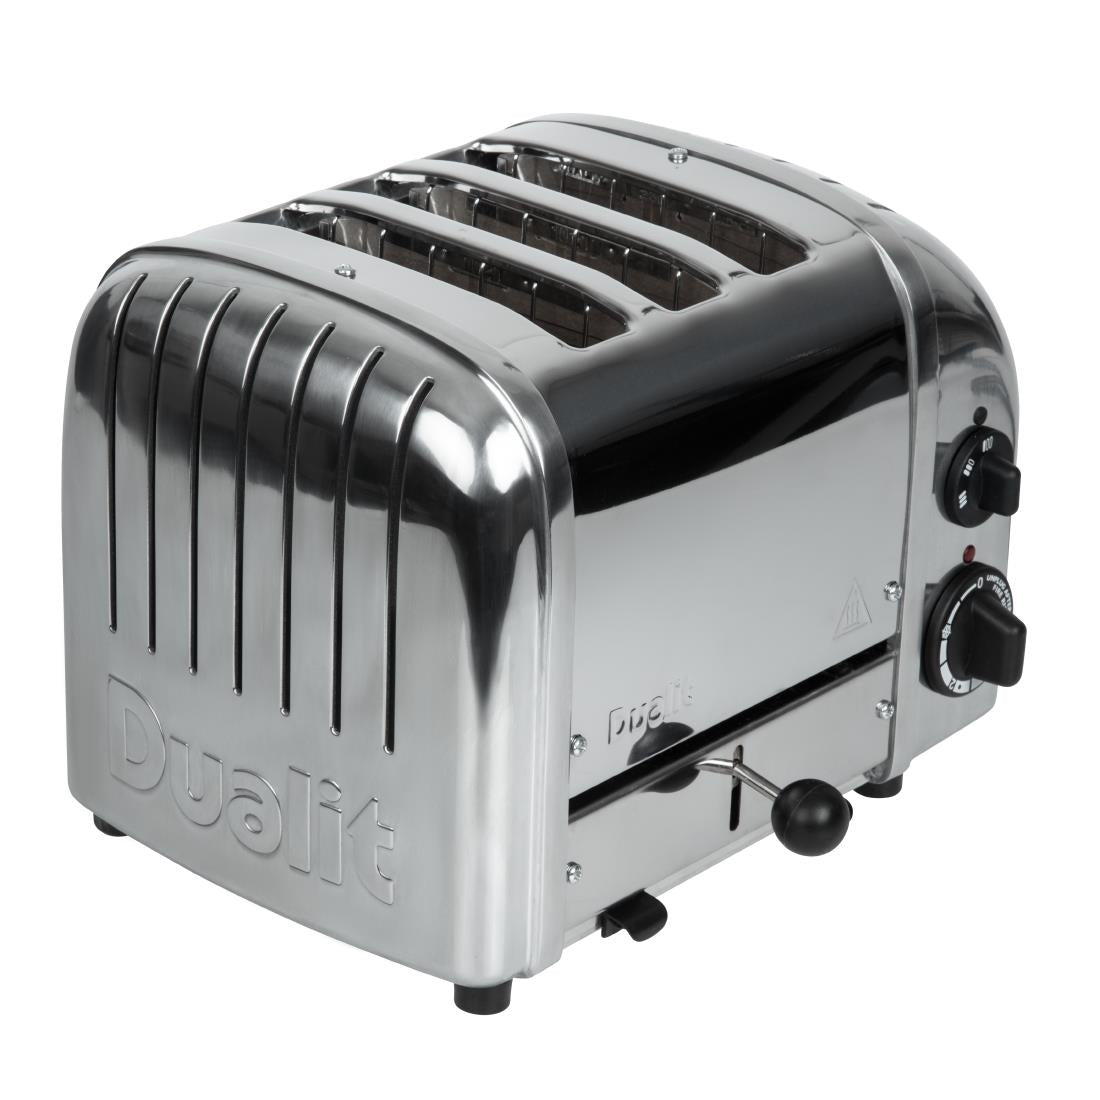 Dualit 2 + 1 Combi Vario 3 Slice Toaster Polished 31213 JD Catering Equipment Solutions Ltd